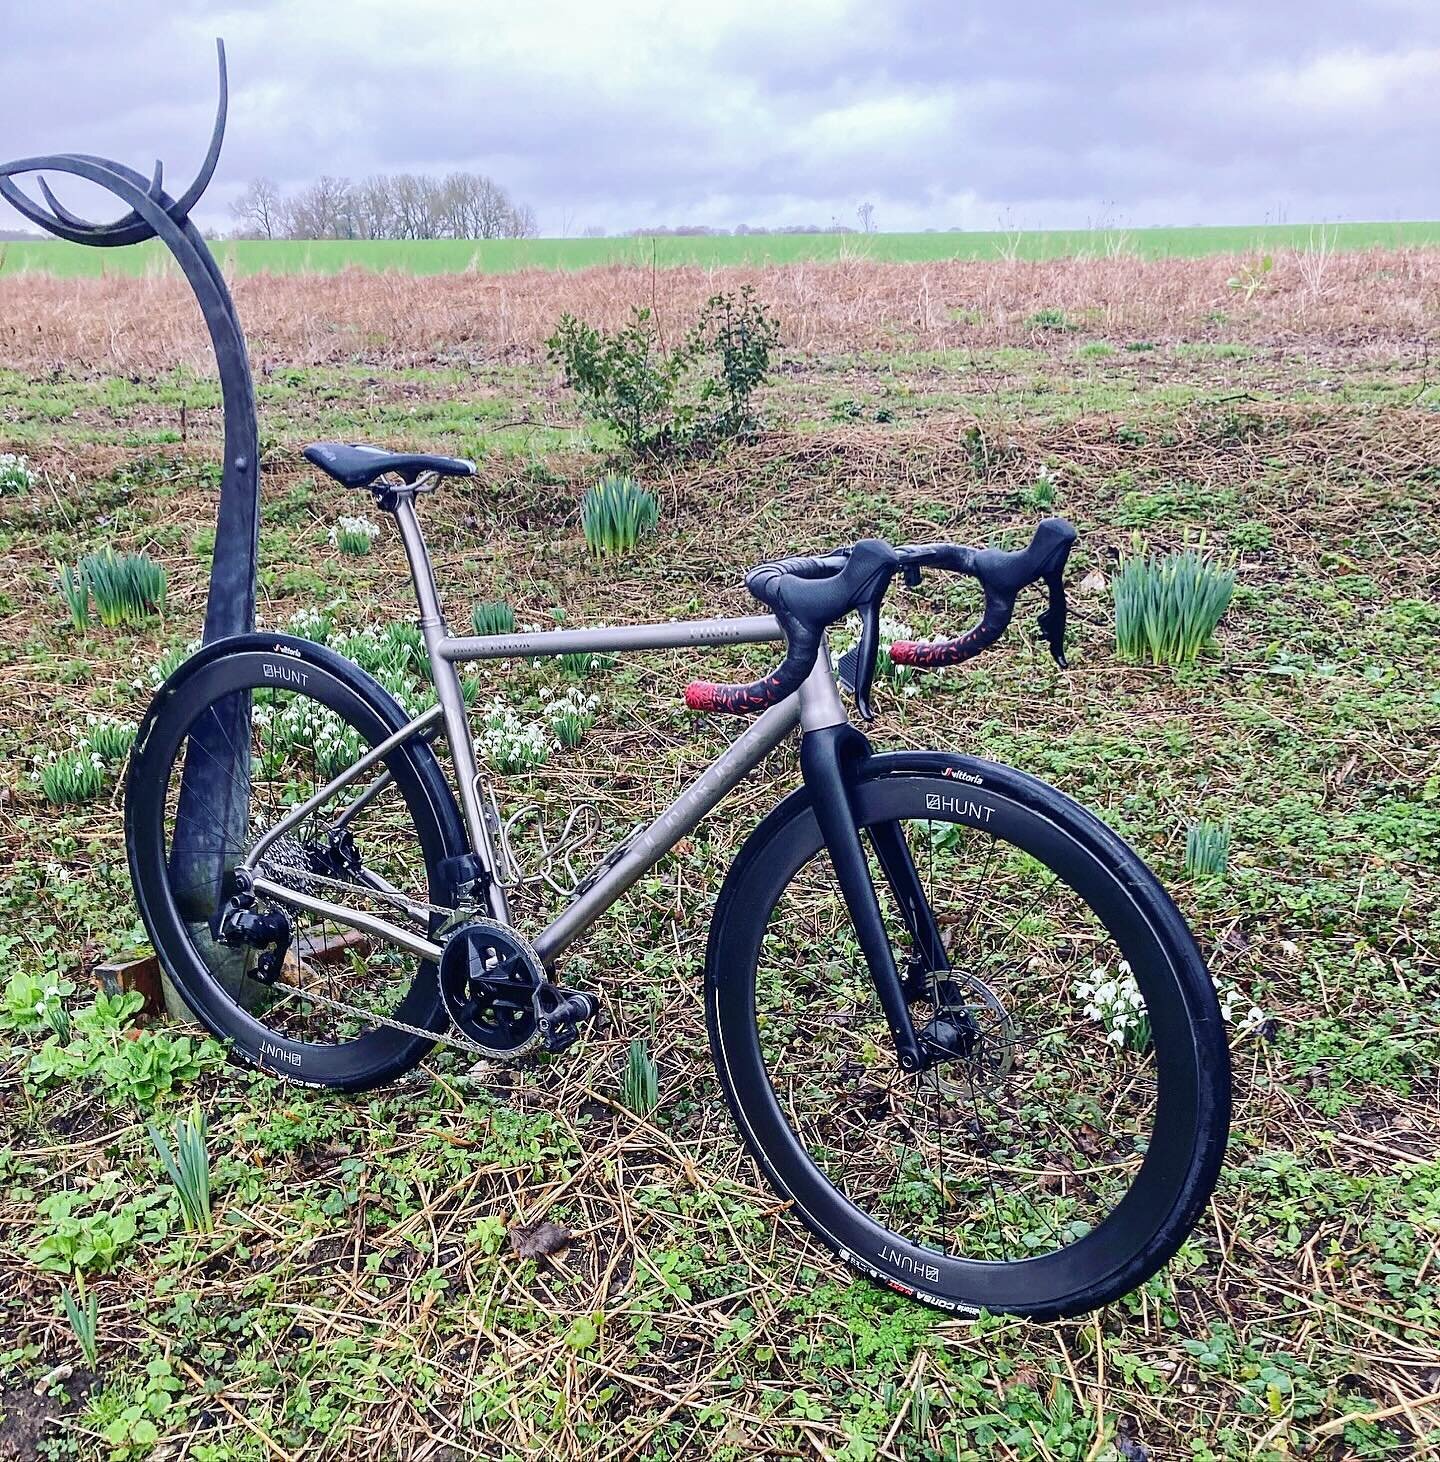 A nice finish for this lightweight Firma, at Brian&rsquo;s request we opted for narrower tubes for a lighter chassis and therefore a lightweight and durable ultra distance bike. Wishing you many happy miles Brian!

#terratitanium #titaniumbike #titan